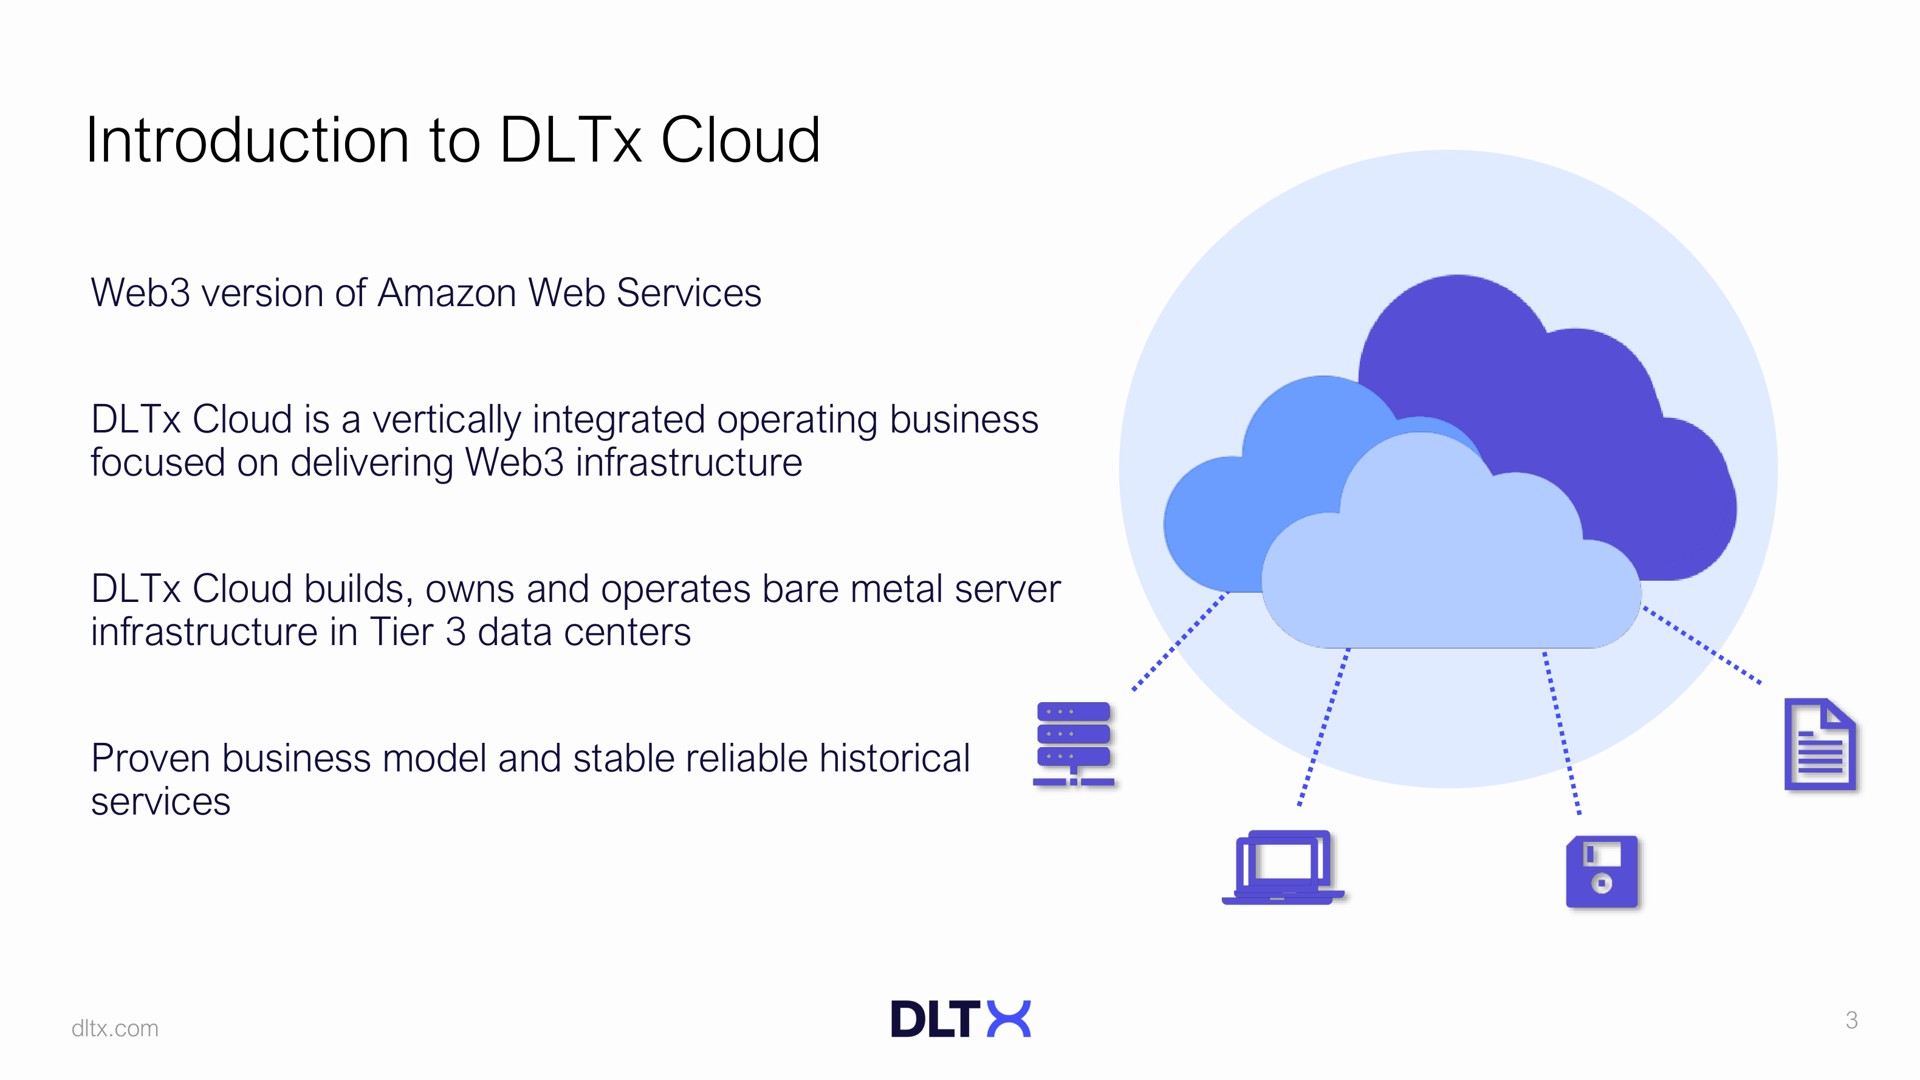 introduction to cloud web version of web services cloud is a vertically integrated operating business focused on delivering web infrastructure cloud builds owns and operates bare metal server infrastructure in tier data centers proven business model and stable reliable historical services | DLTx